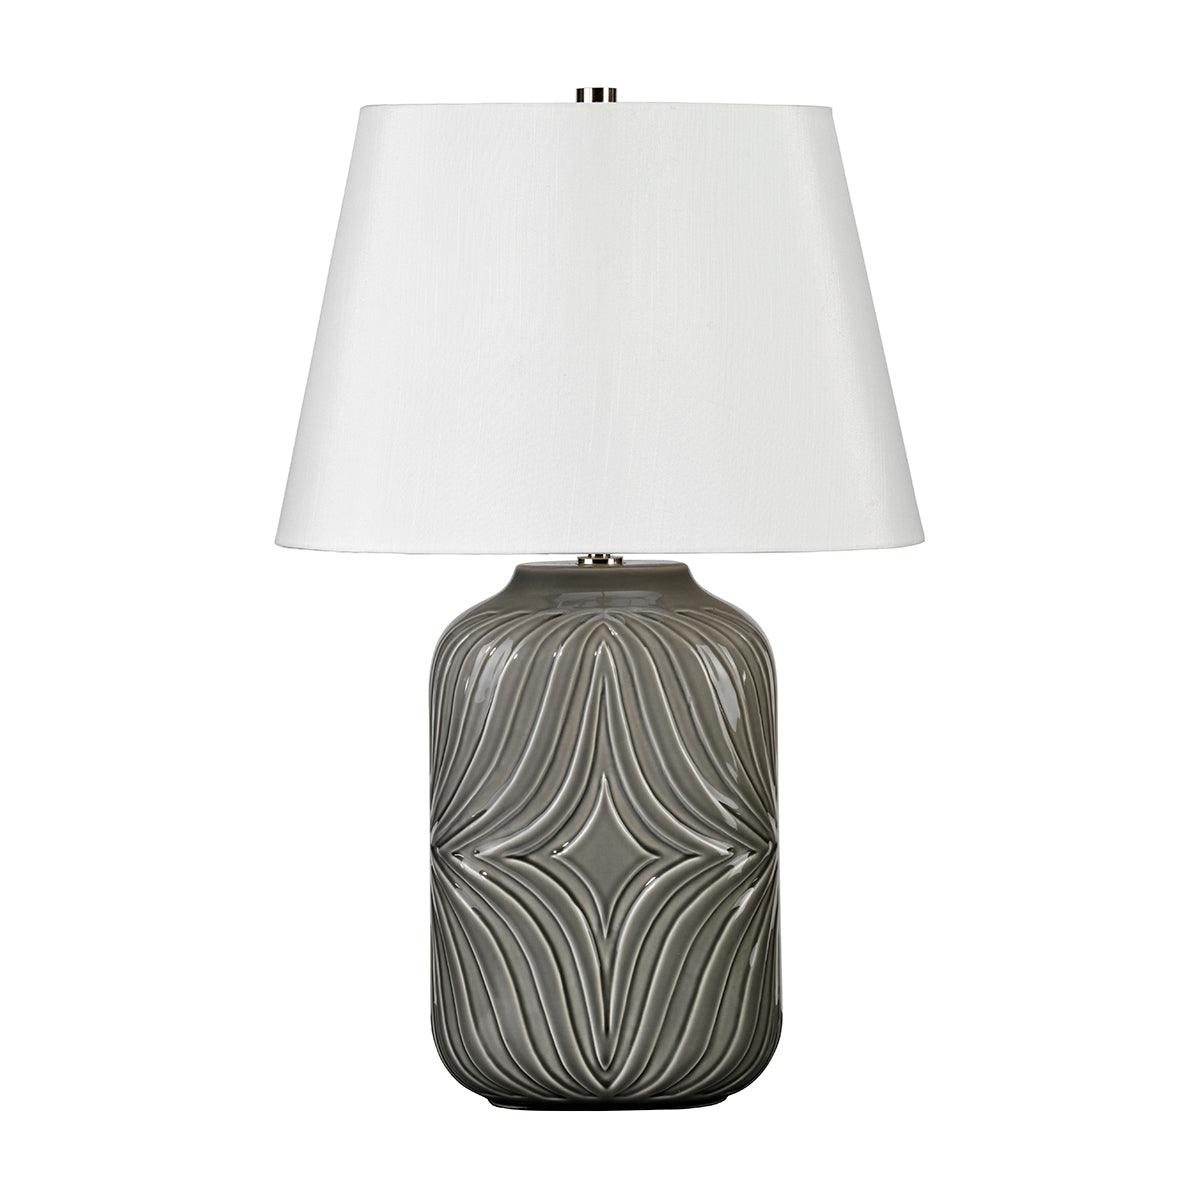 Elstead Lighting - MUSE-TL-GREY - Elstead Lighting Table Lamp from the Muse range. Muse 1 Light Table Lamp - Grey Product Code = MUSE-TL-GREY